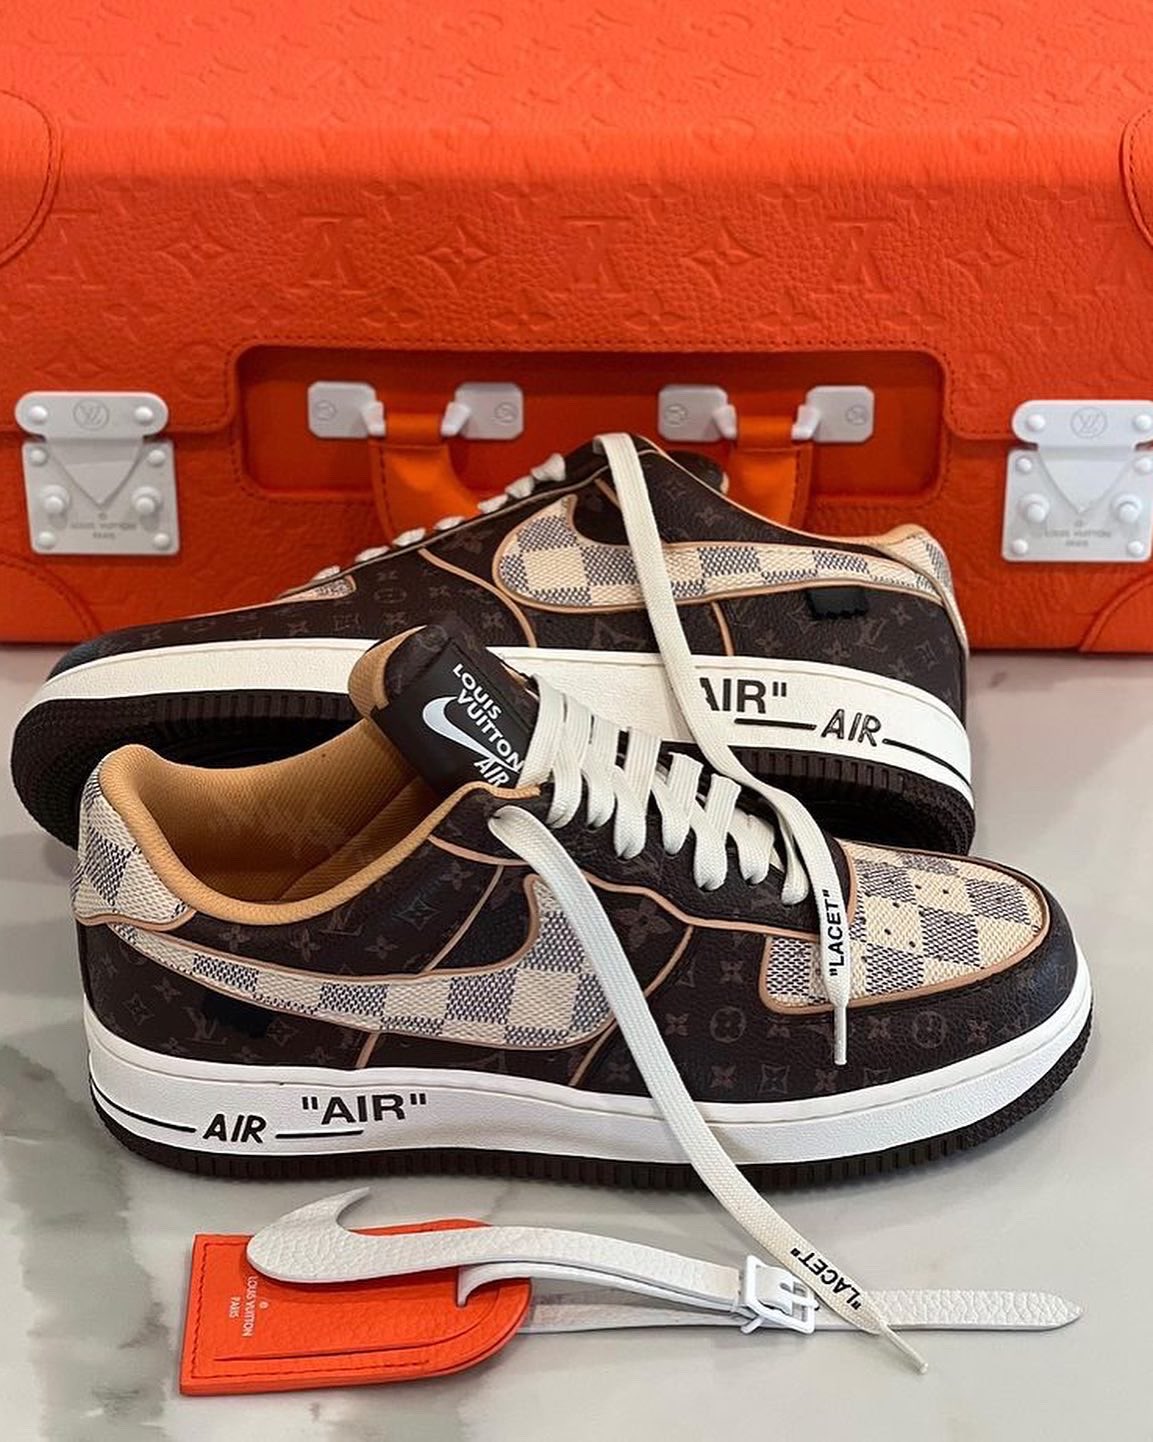 Those much-teased Louis Vuitton Nike Air Force Ones could finally be yours…